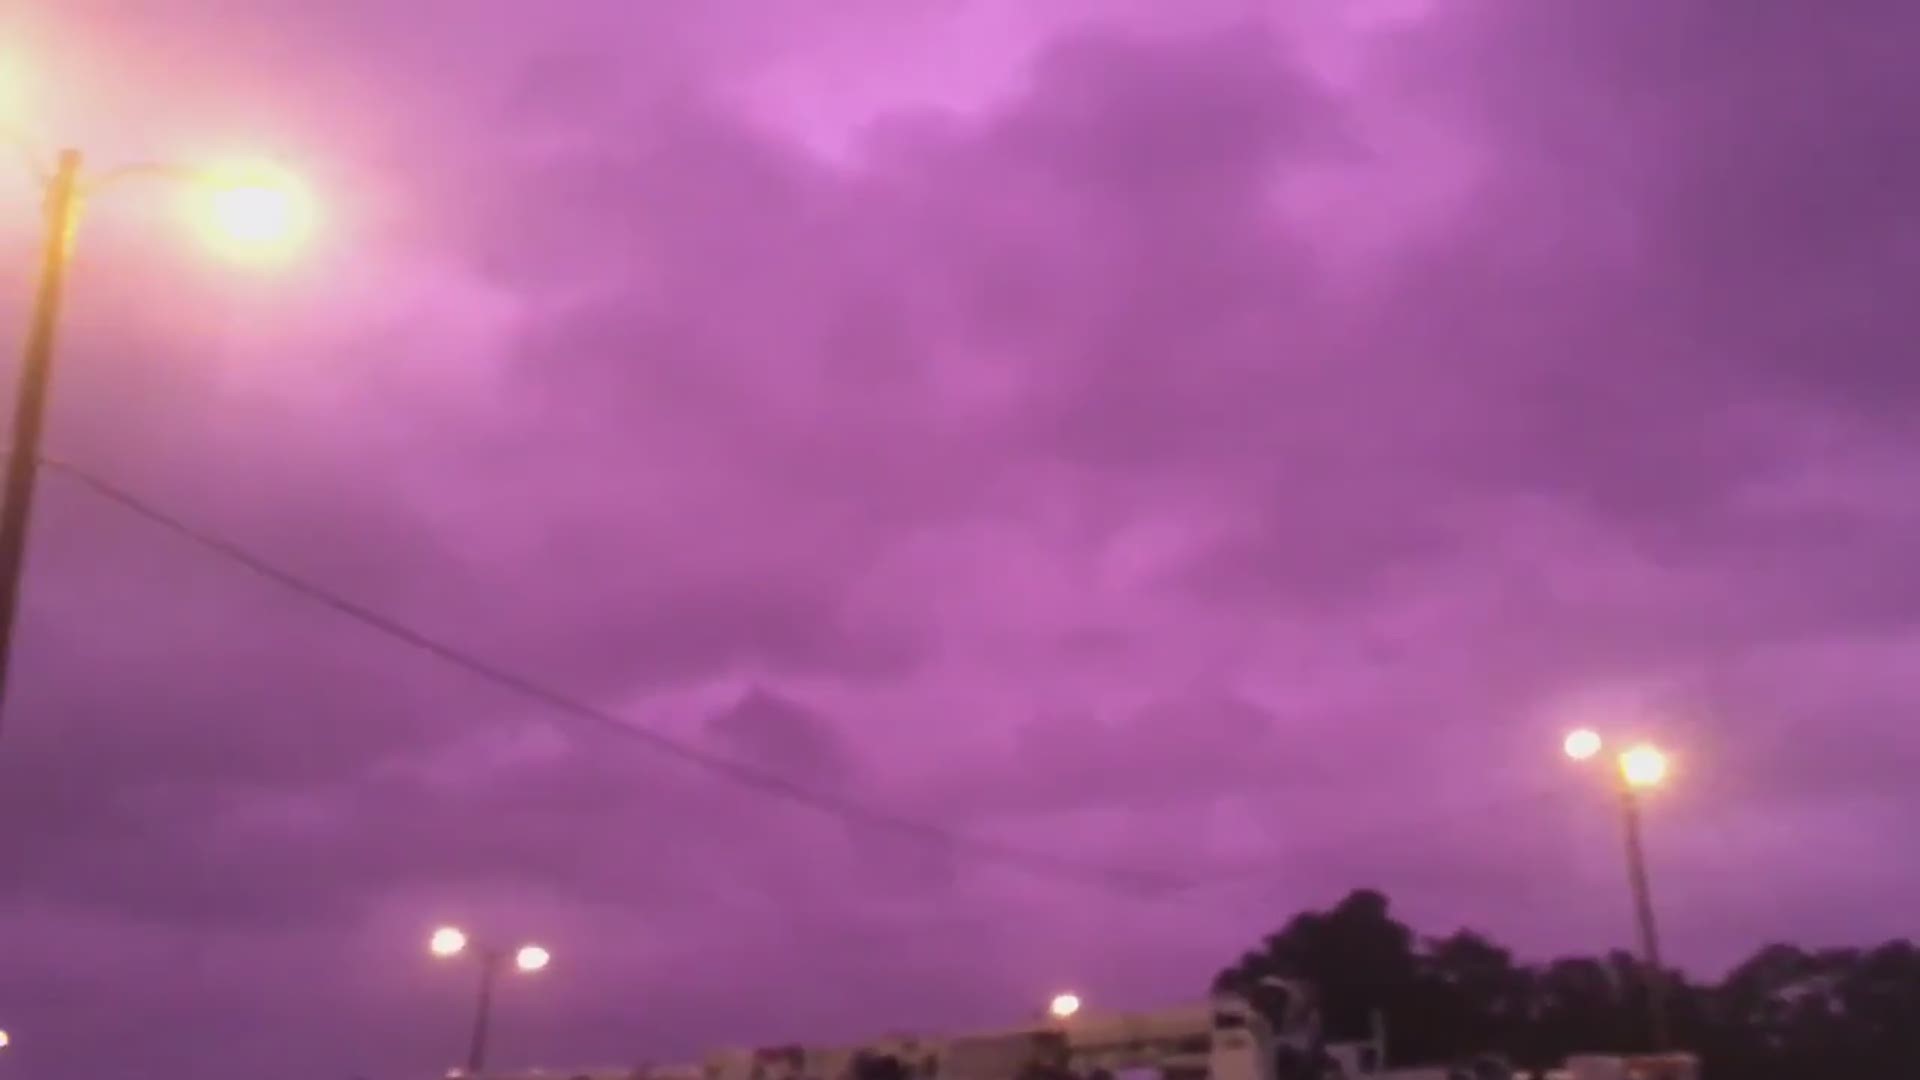 First Coast News' Shelby Danielson captured this creepy footage of the purple sky over Lake City.